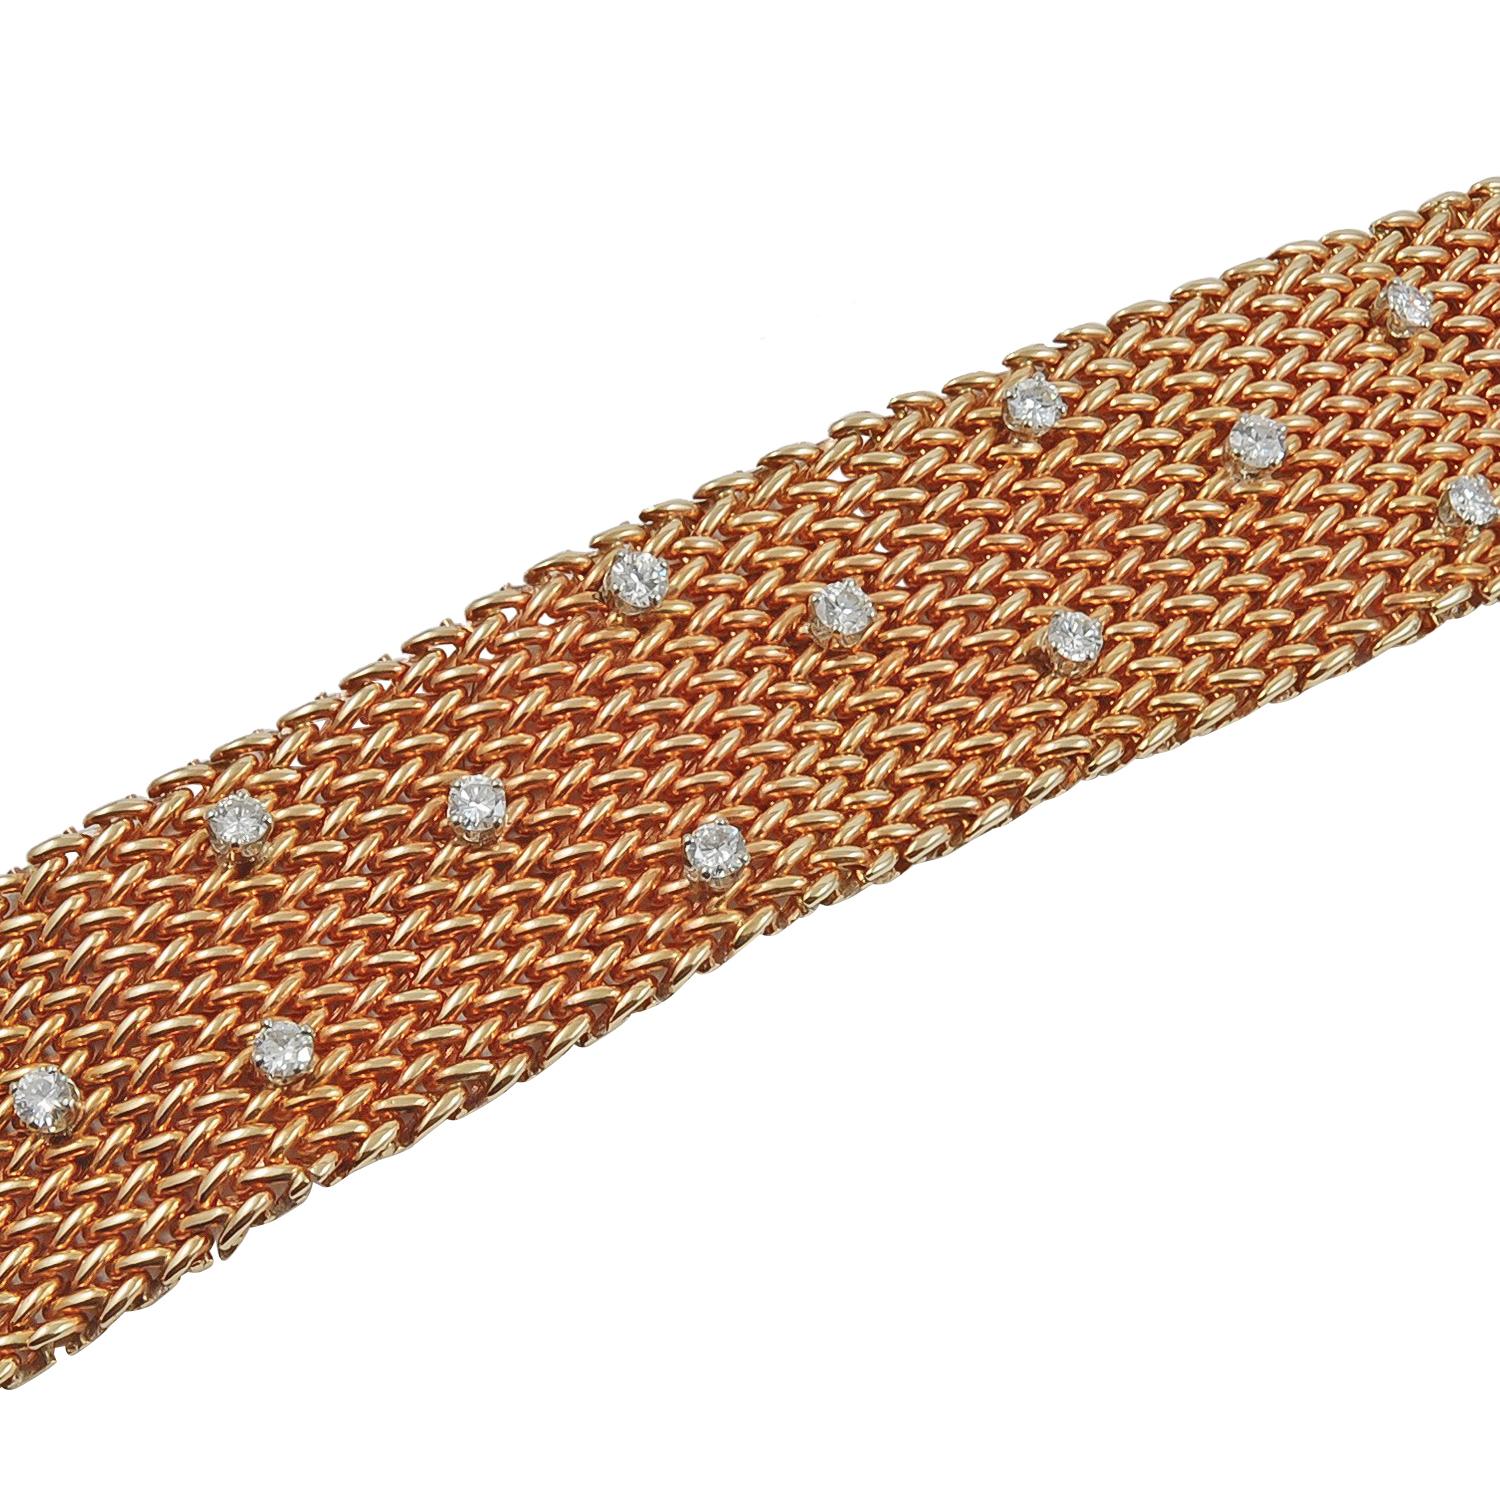 An 18k yellow gold mesh design bracelet, set with round diamonds, circa 1970s
Measures approximately 6.75″ in length by 1″ in width
Condition: Good – Previously owned and gently worn, with little signs of use. May show light scratches but has no